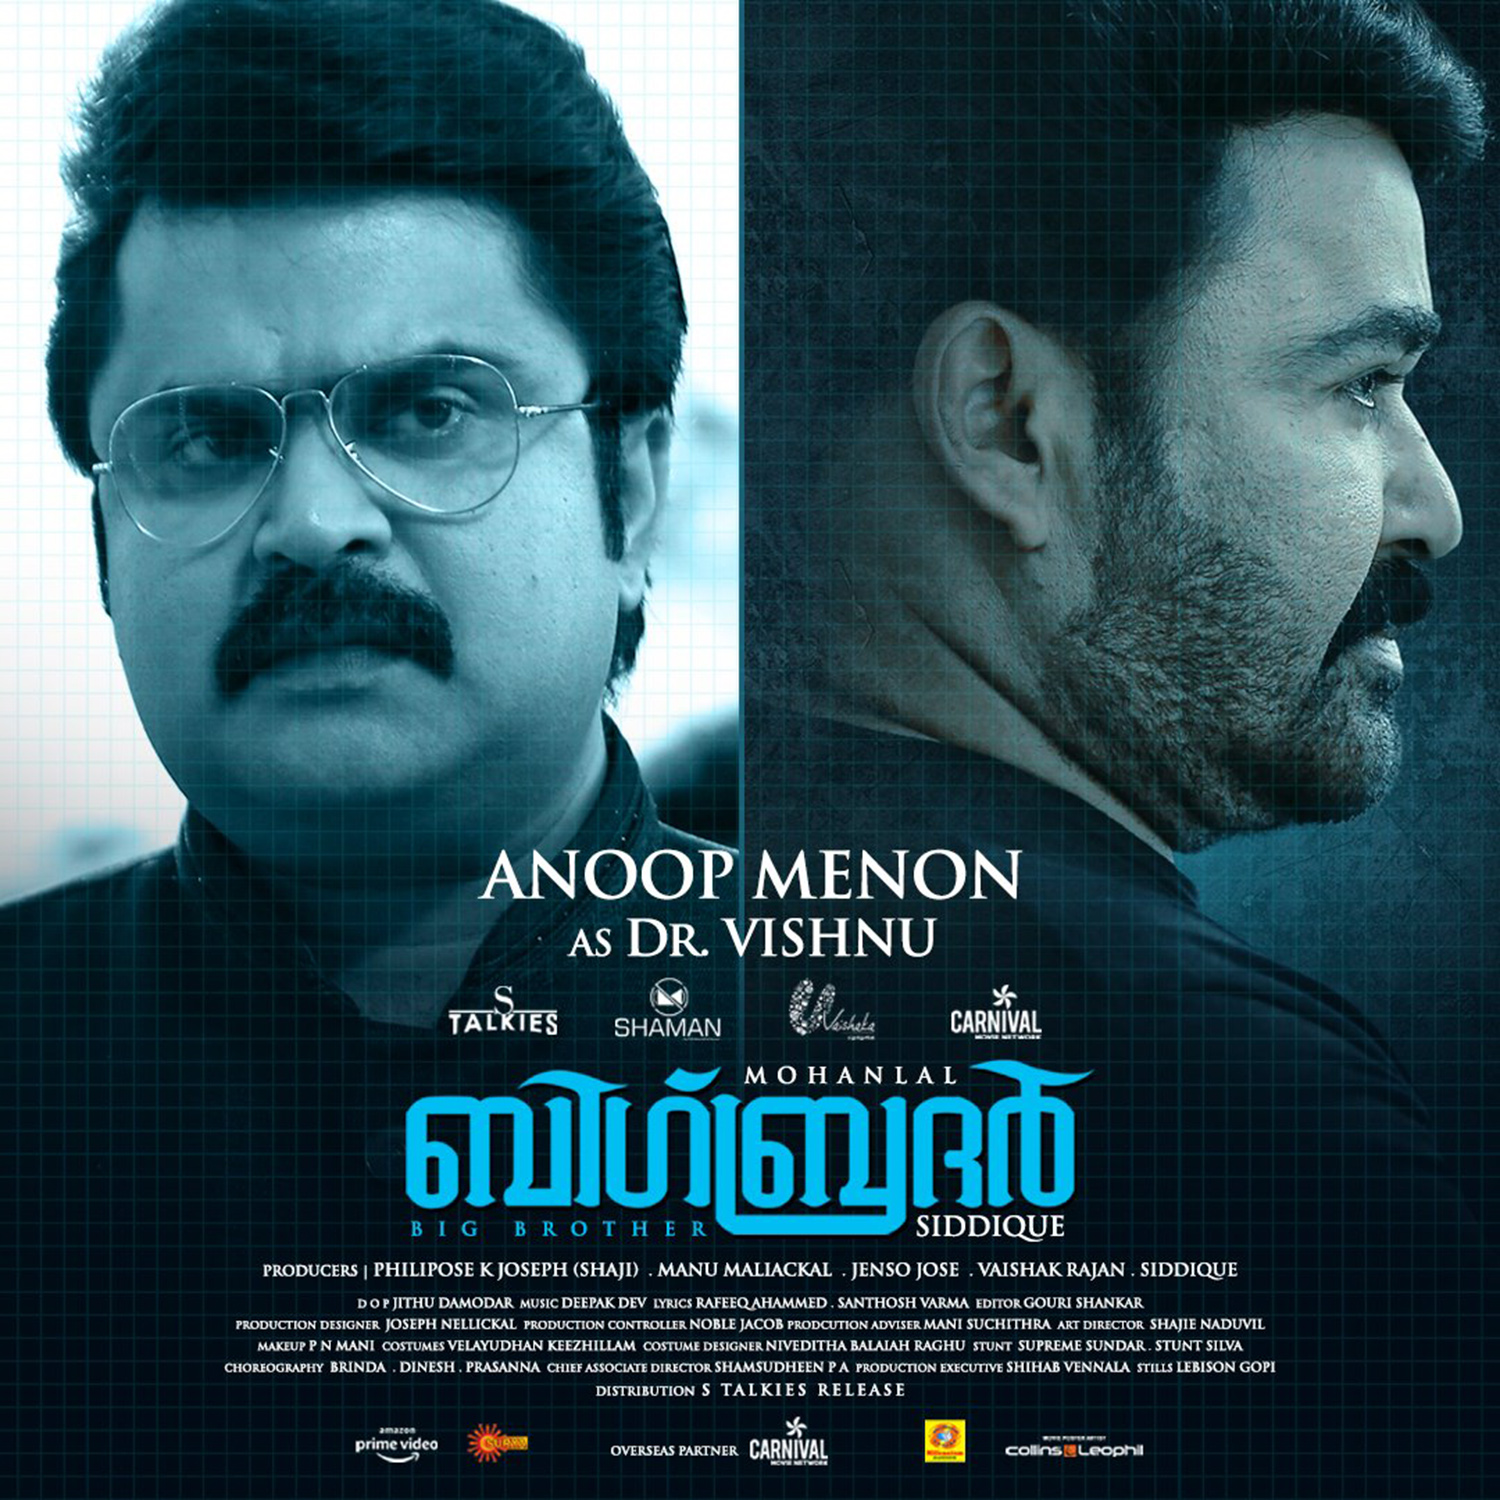 Big Brother,Big Brother character poster,mohanlal,director siddique,anoop menon,anoop menon in Big Brother,Big Brother anoop menon's character poster,arbaaz khan,arbaaz khan in Big Brother,arbaaz khan character poster Big Brother,mohanlal's film news,mohanlal's Big Brother latest news